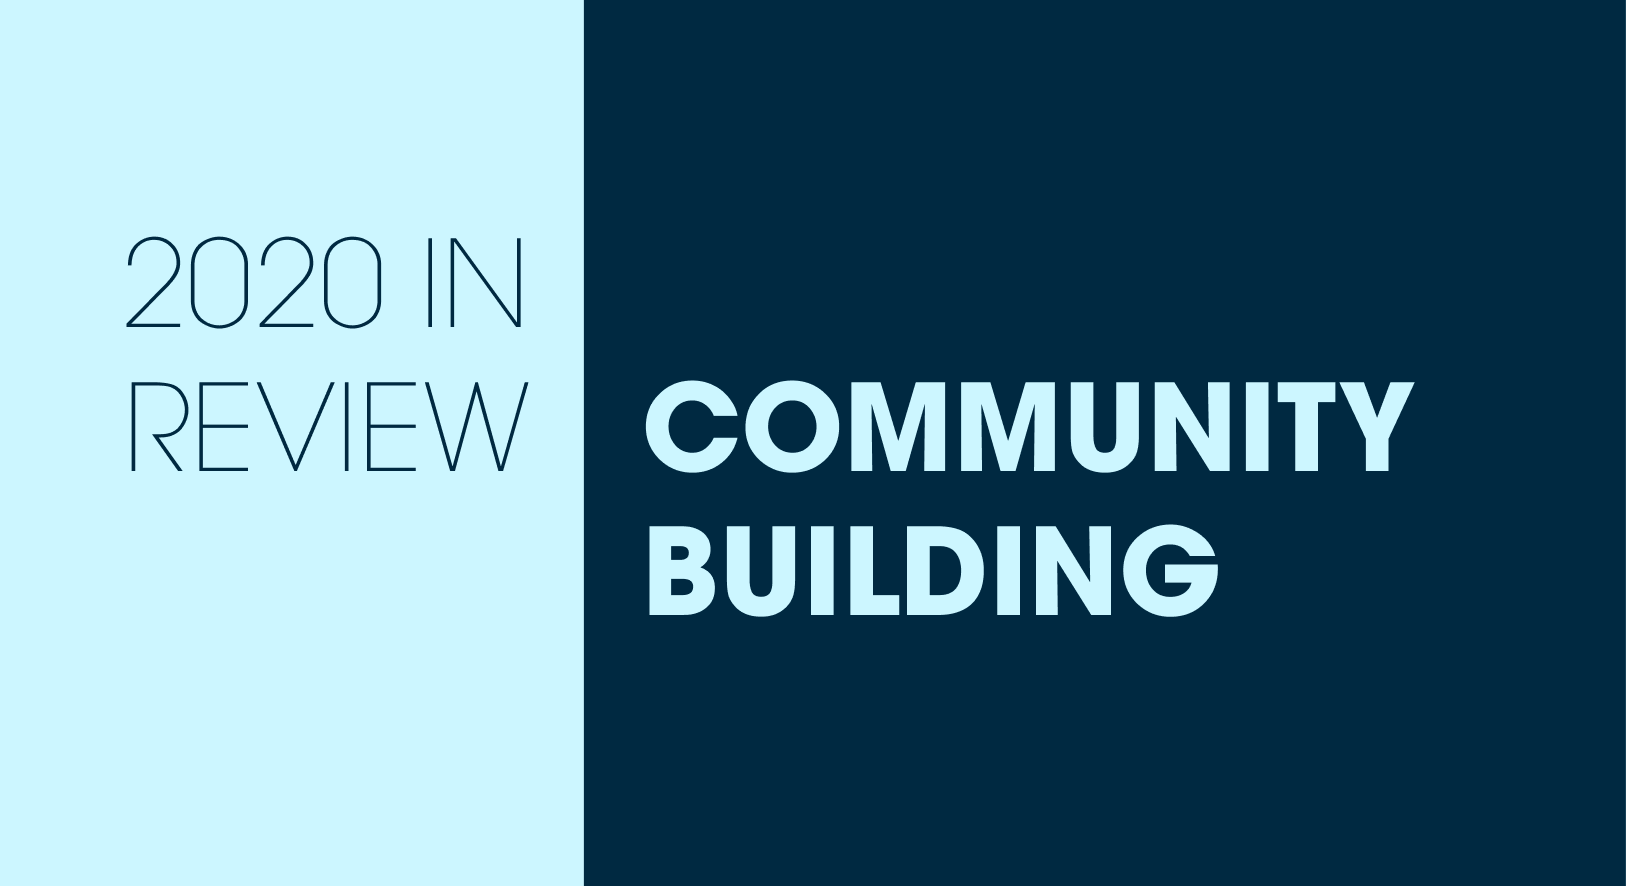 2020 in Review: Community Building